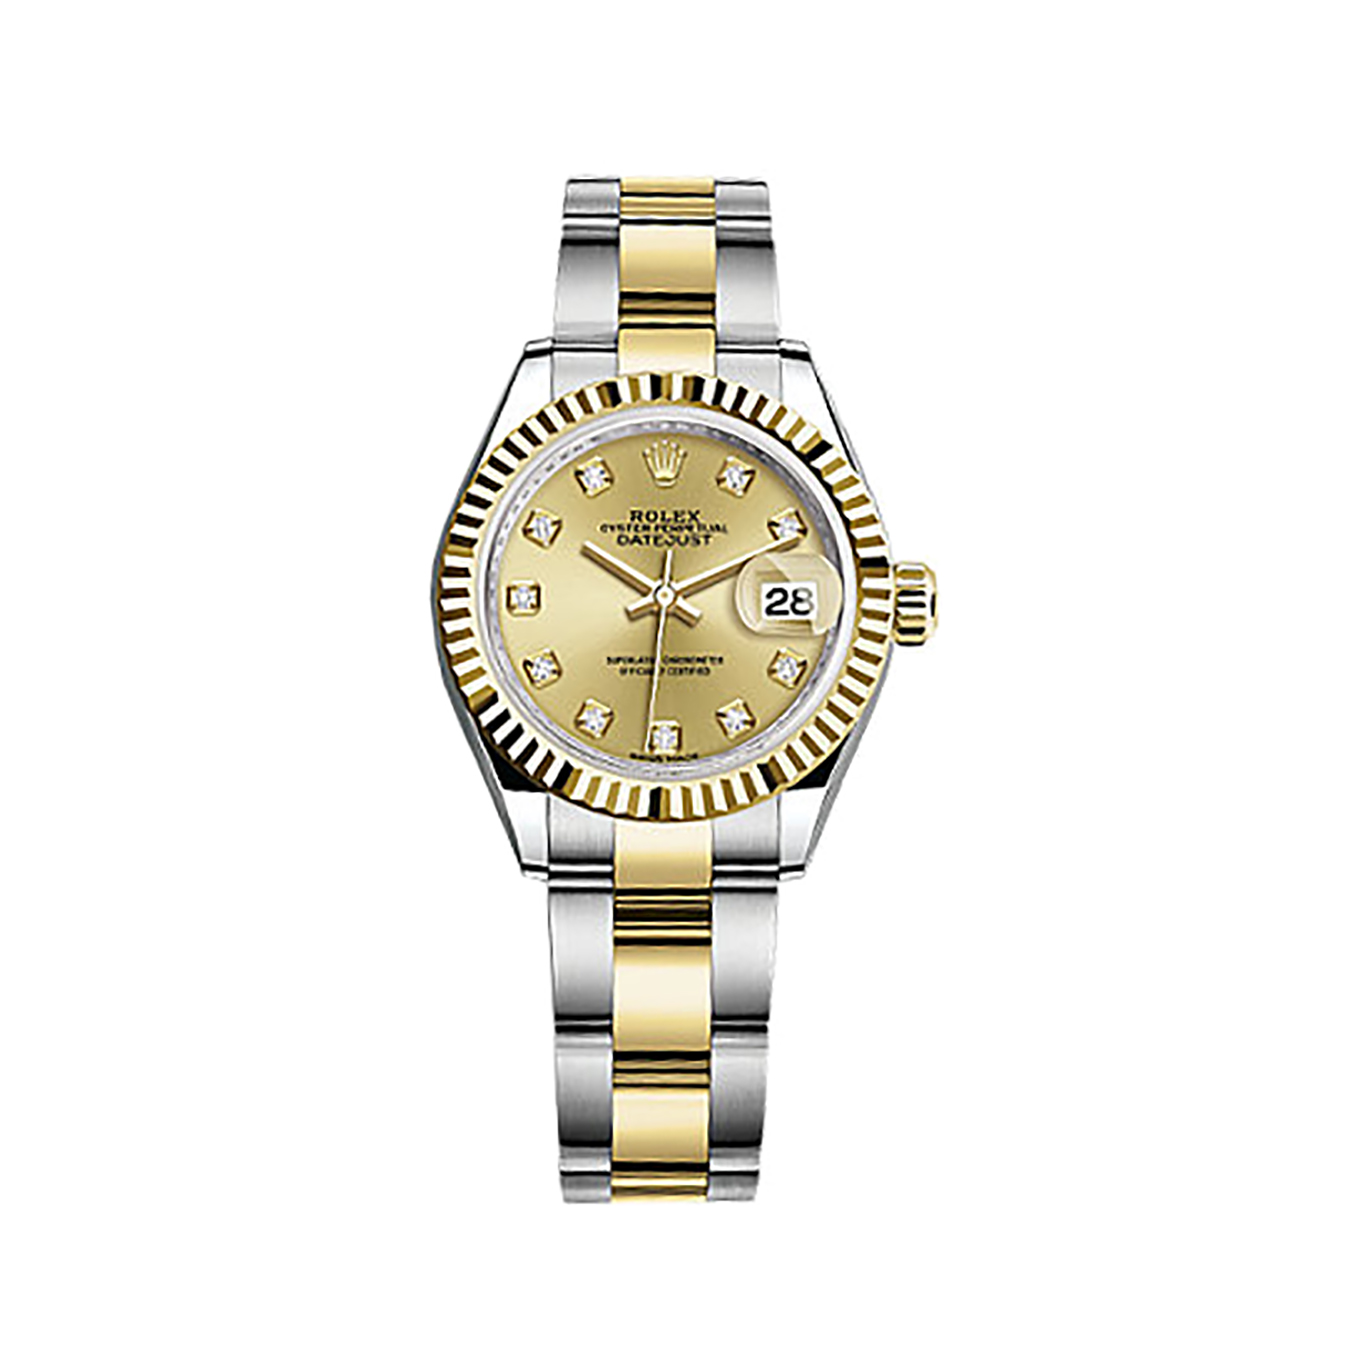 Lady-Datejust 28 279173 Gold & Stainless Steel Watch (Champagne Set with Diamonds)